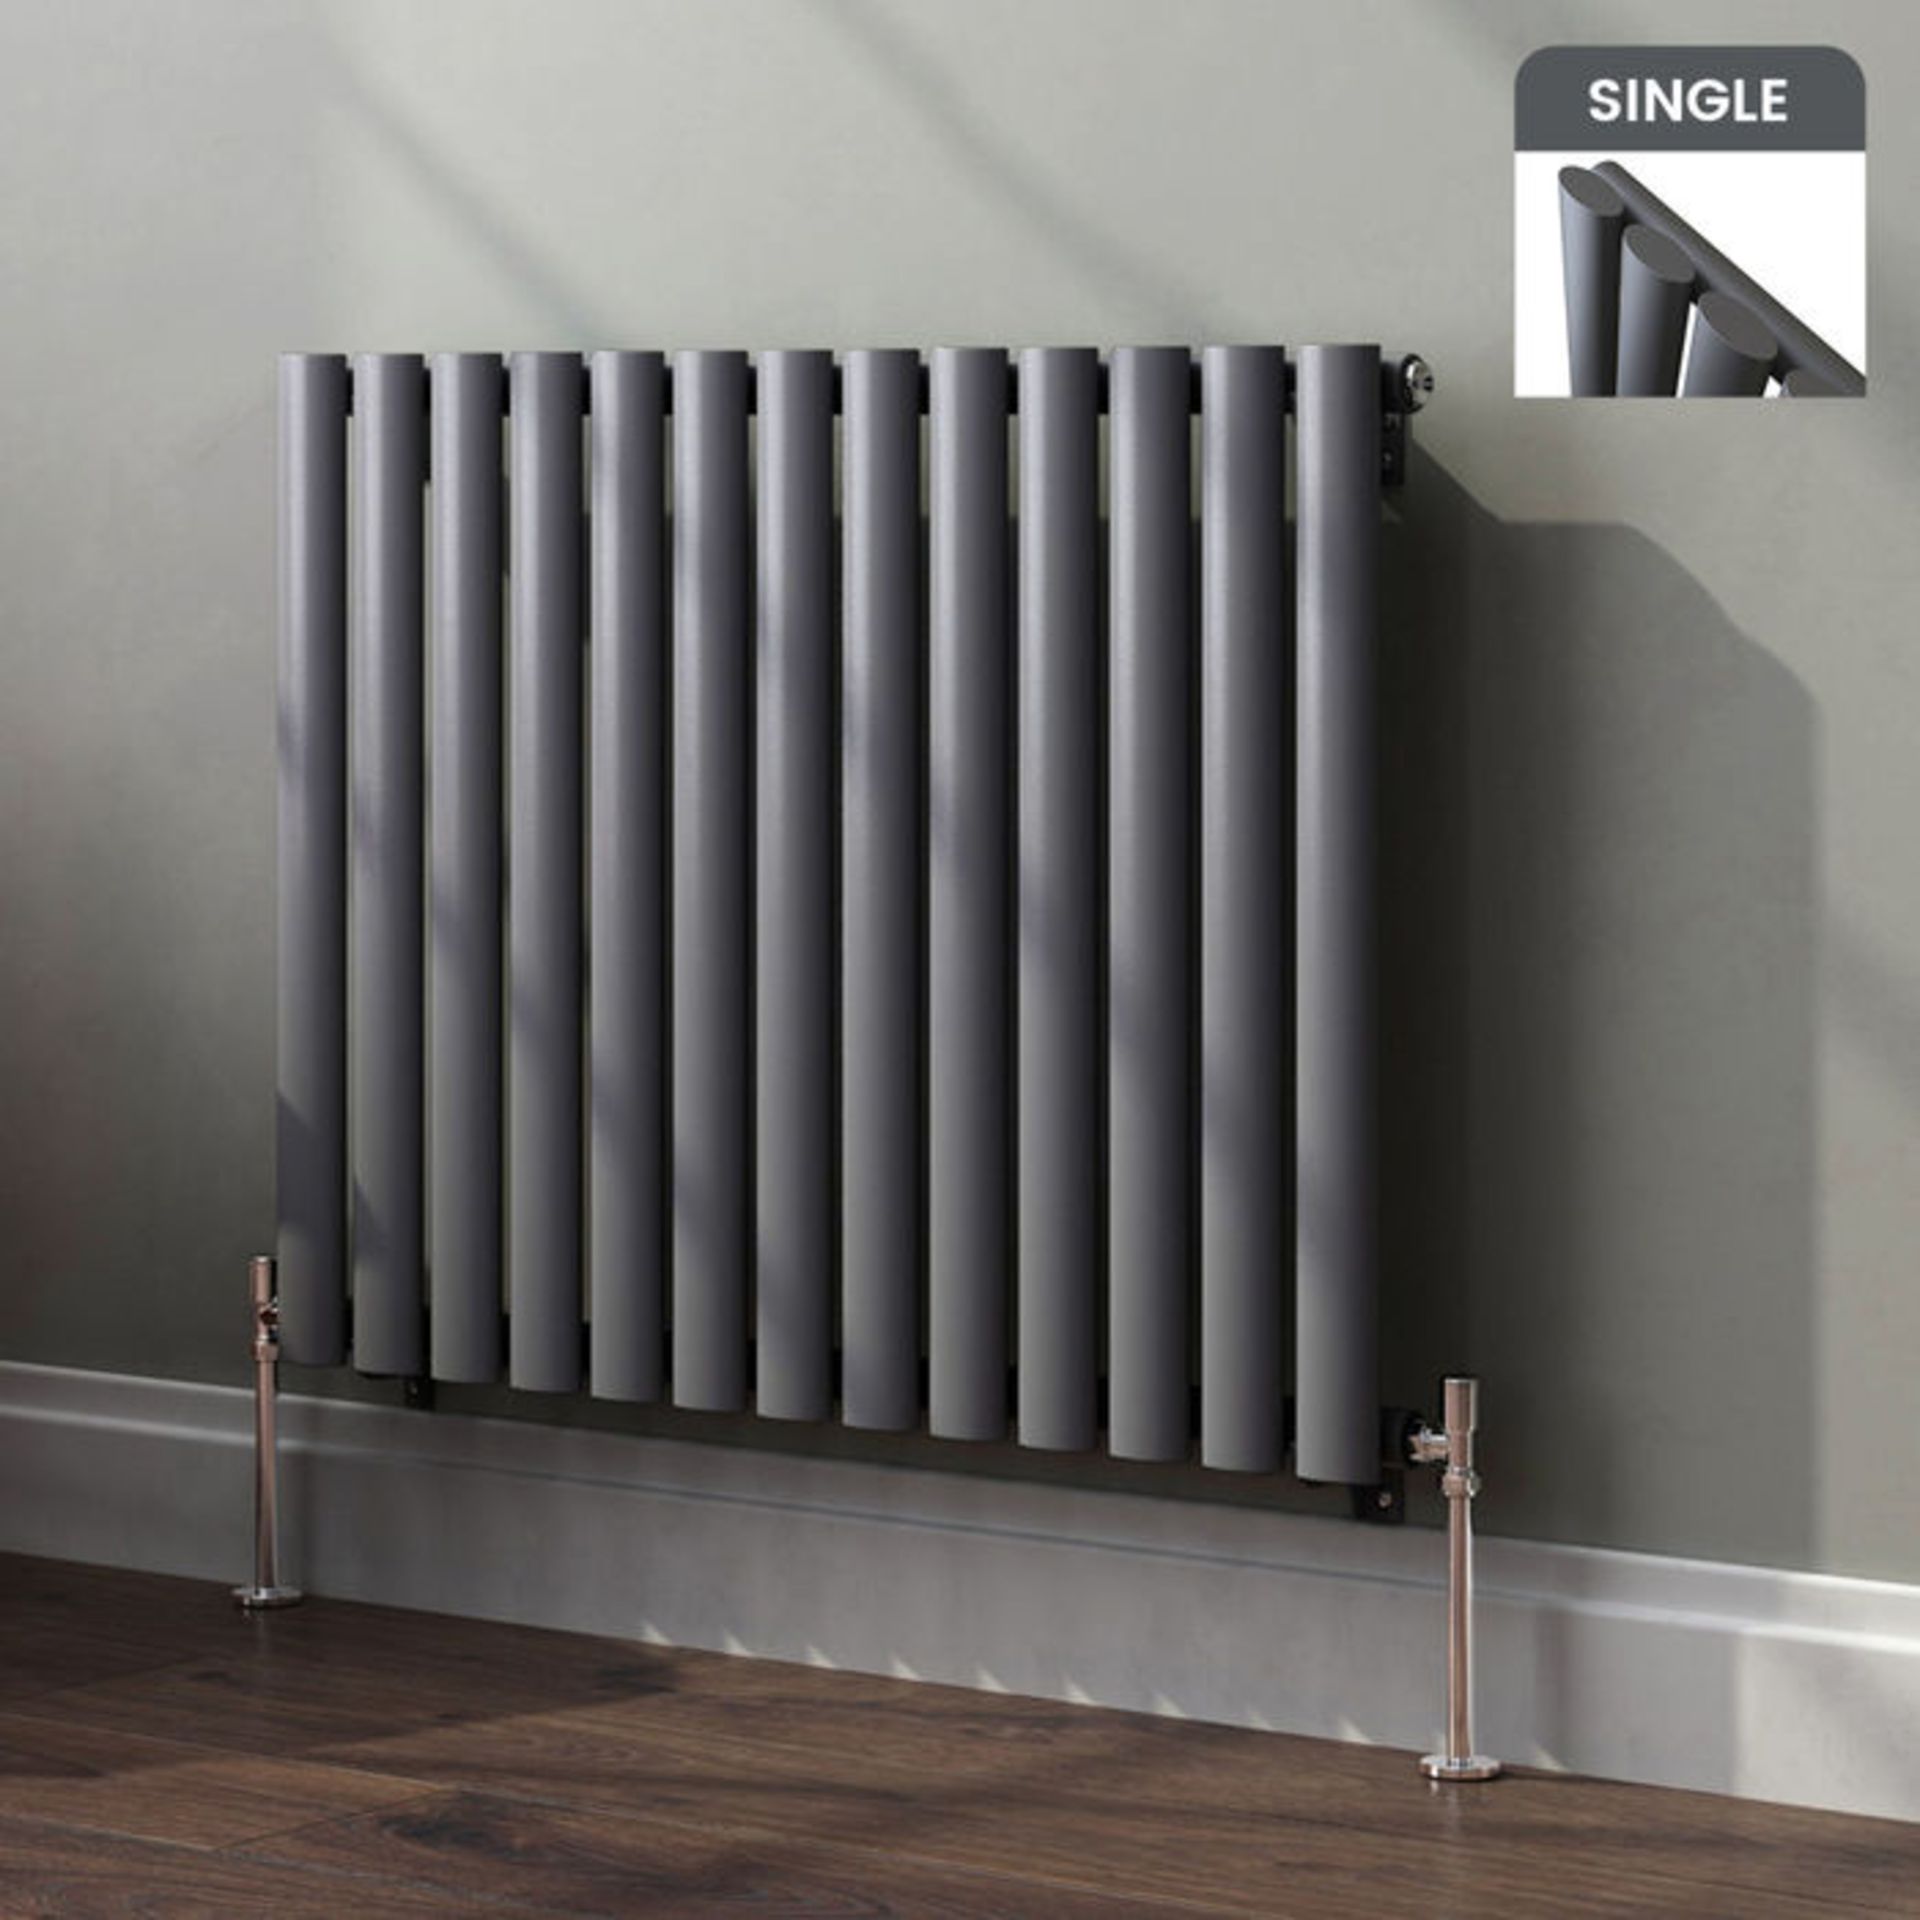 (KL41) 600x780mm Anthracite Single Panel Oval Tube Horizontal Radiator. Made from high quality low